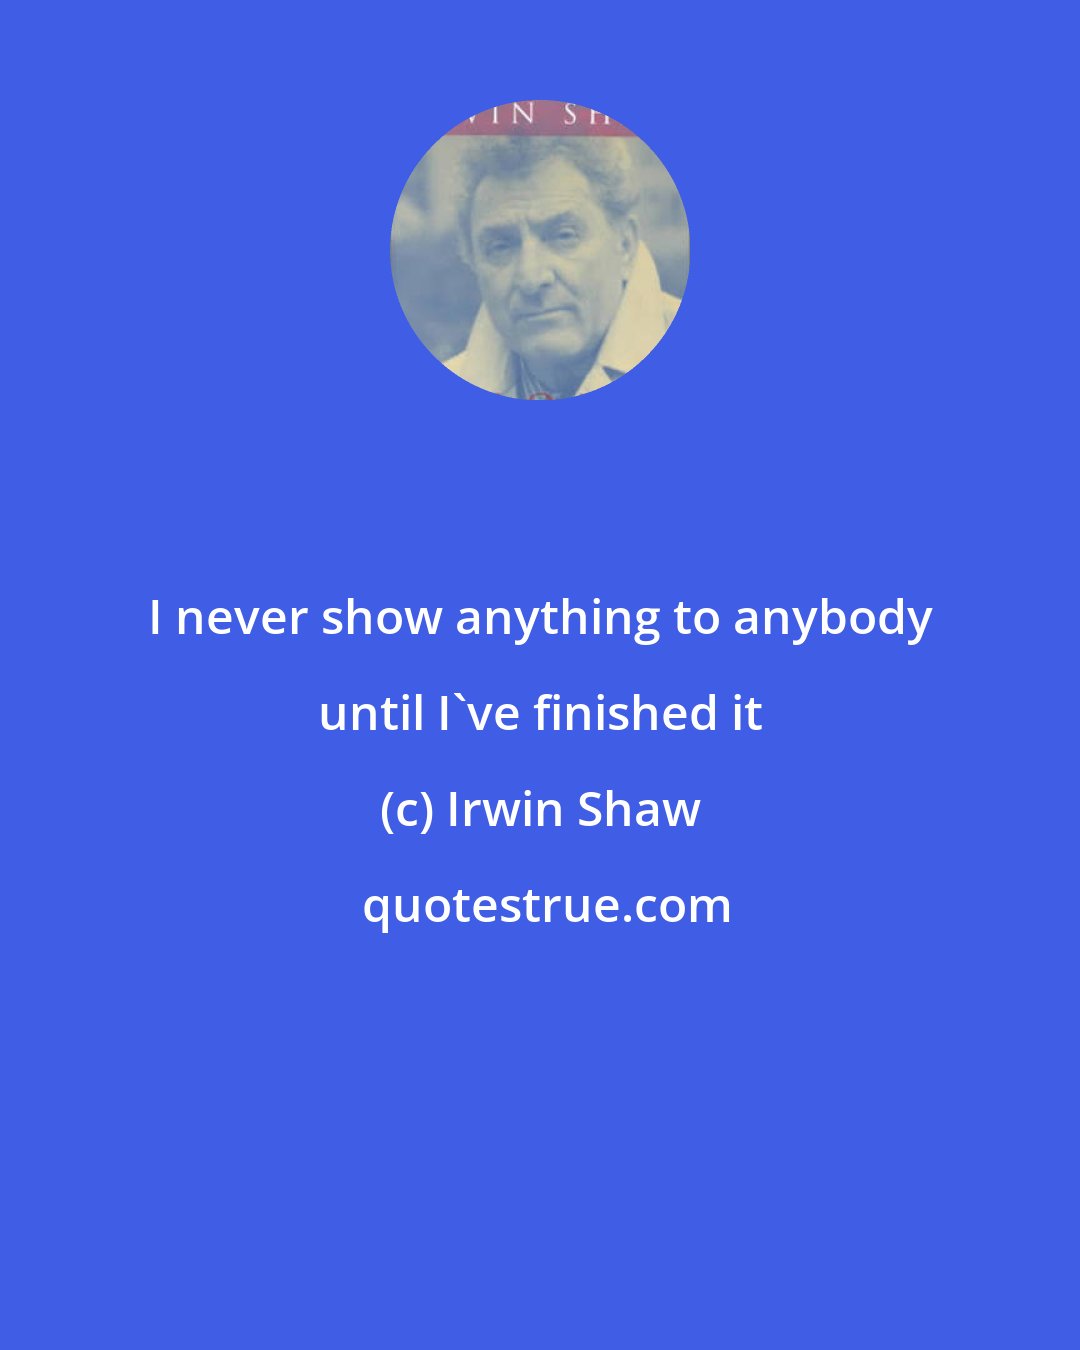 Irwin Shaw: I never show anything to anybody until I've finished it